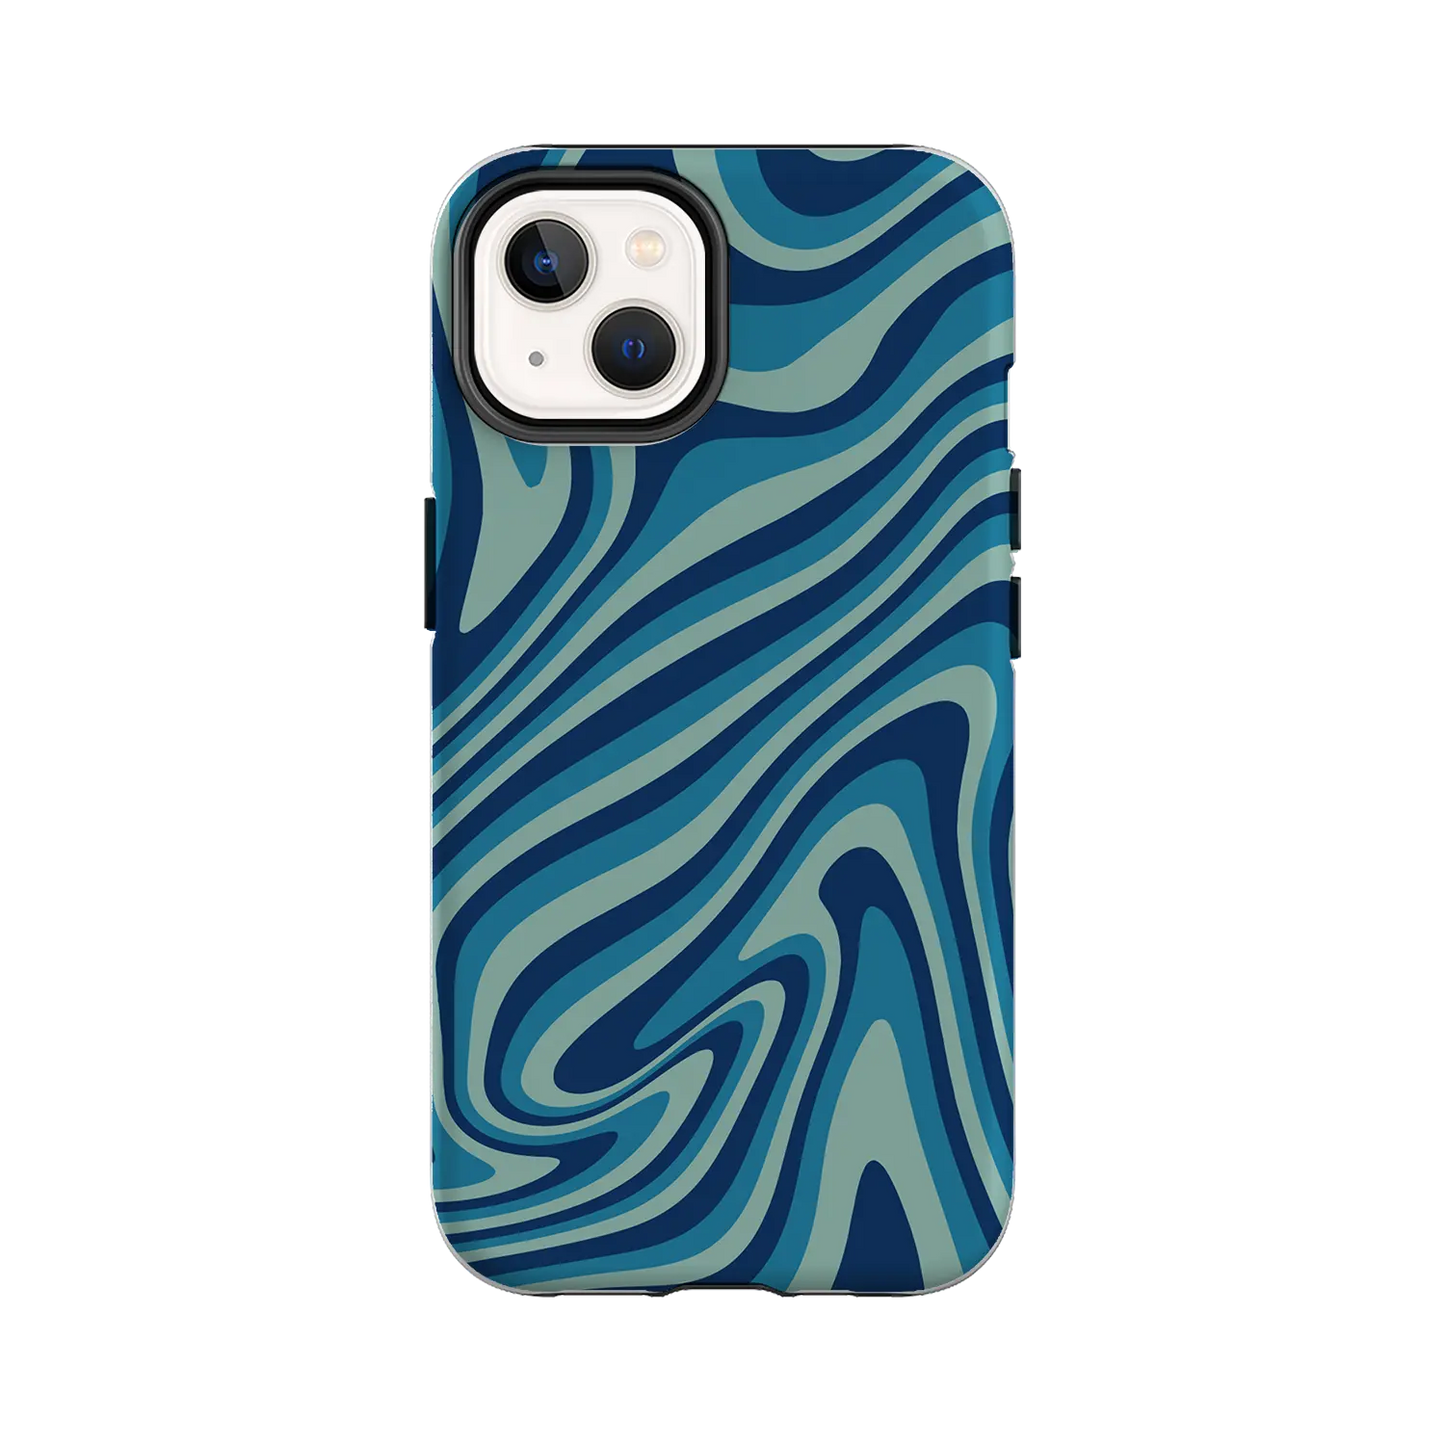 Groovy - Coque iPhone Personnalisée